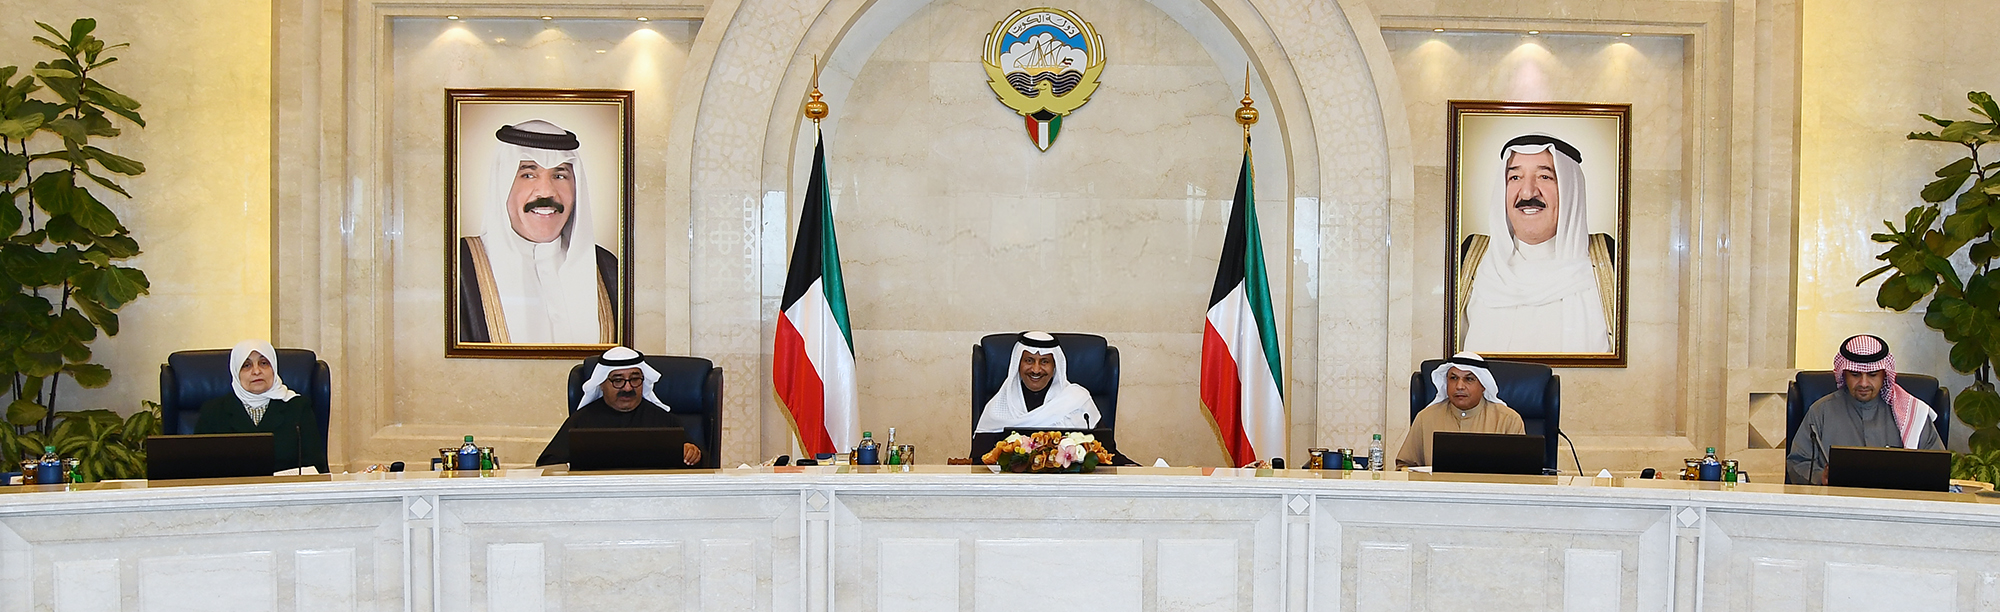 His Highness the Prime Minister Sheikh Jaber Al-Mubarak Al-Hamad Al-Sabah chairs weekly cabinet session